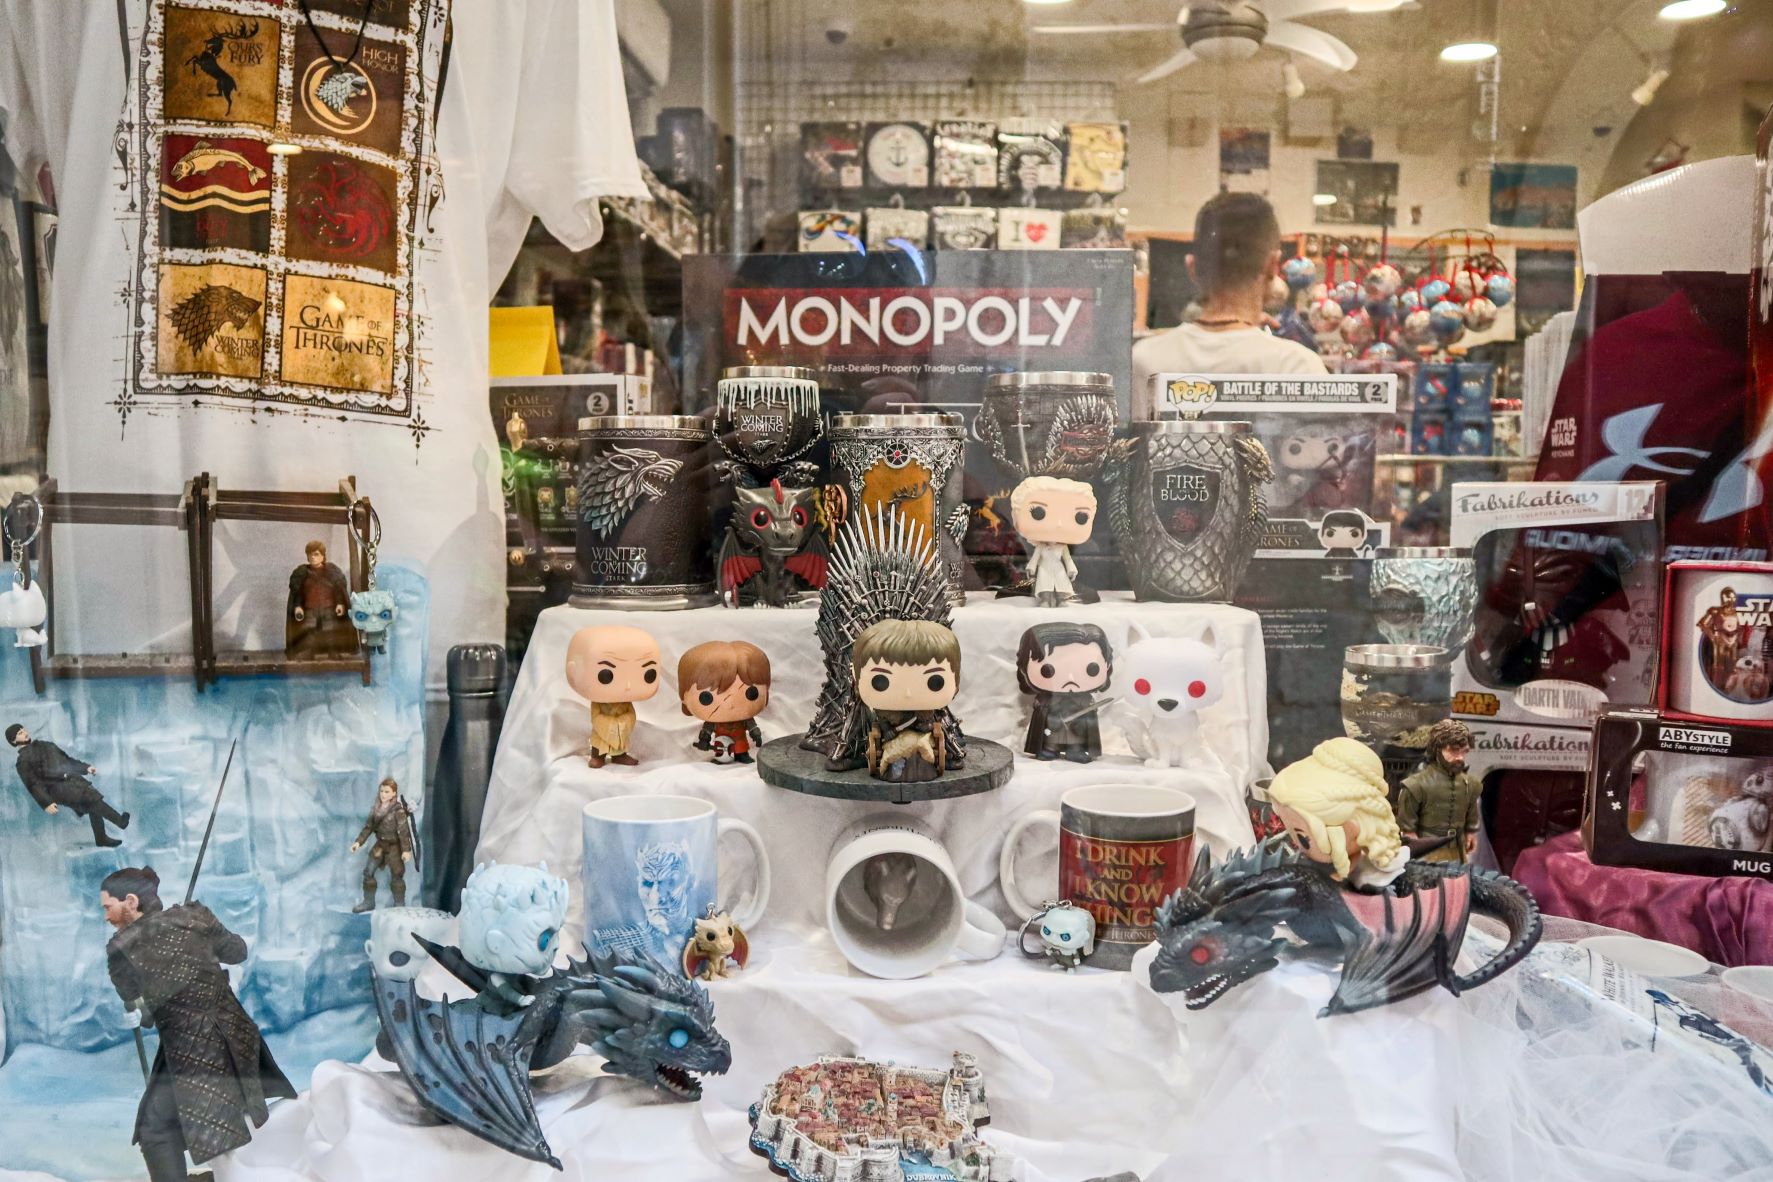 Game of Thrones souveniers